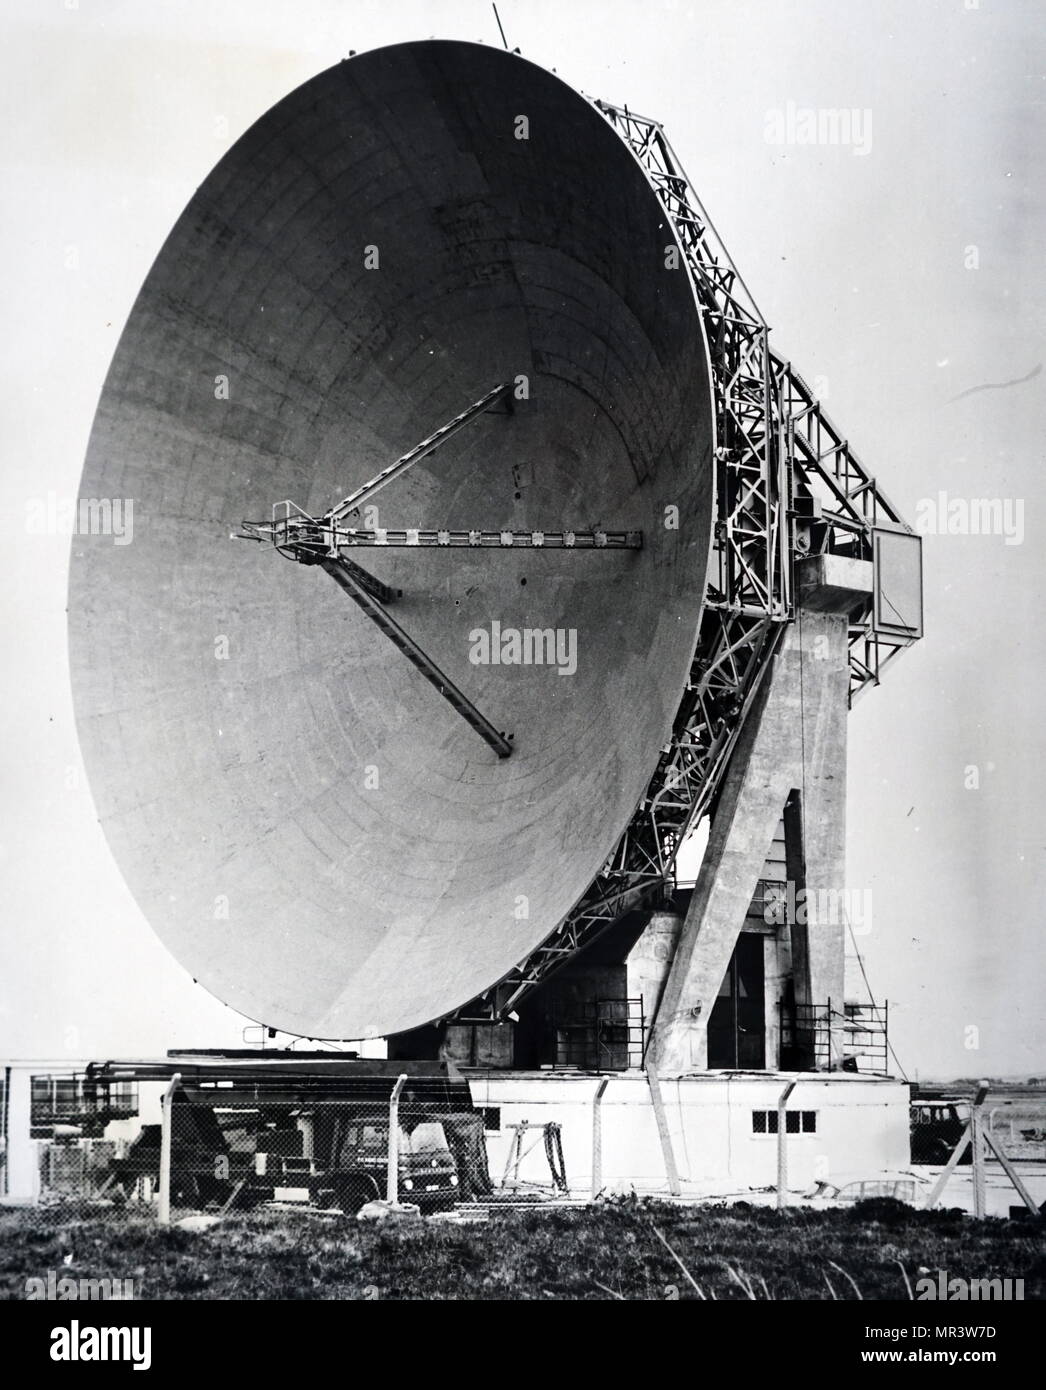 Photograph of the dish antenna used in the communications experiments with the Telstar Satellite located at Goonhilly Downs, England Stock Photo